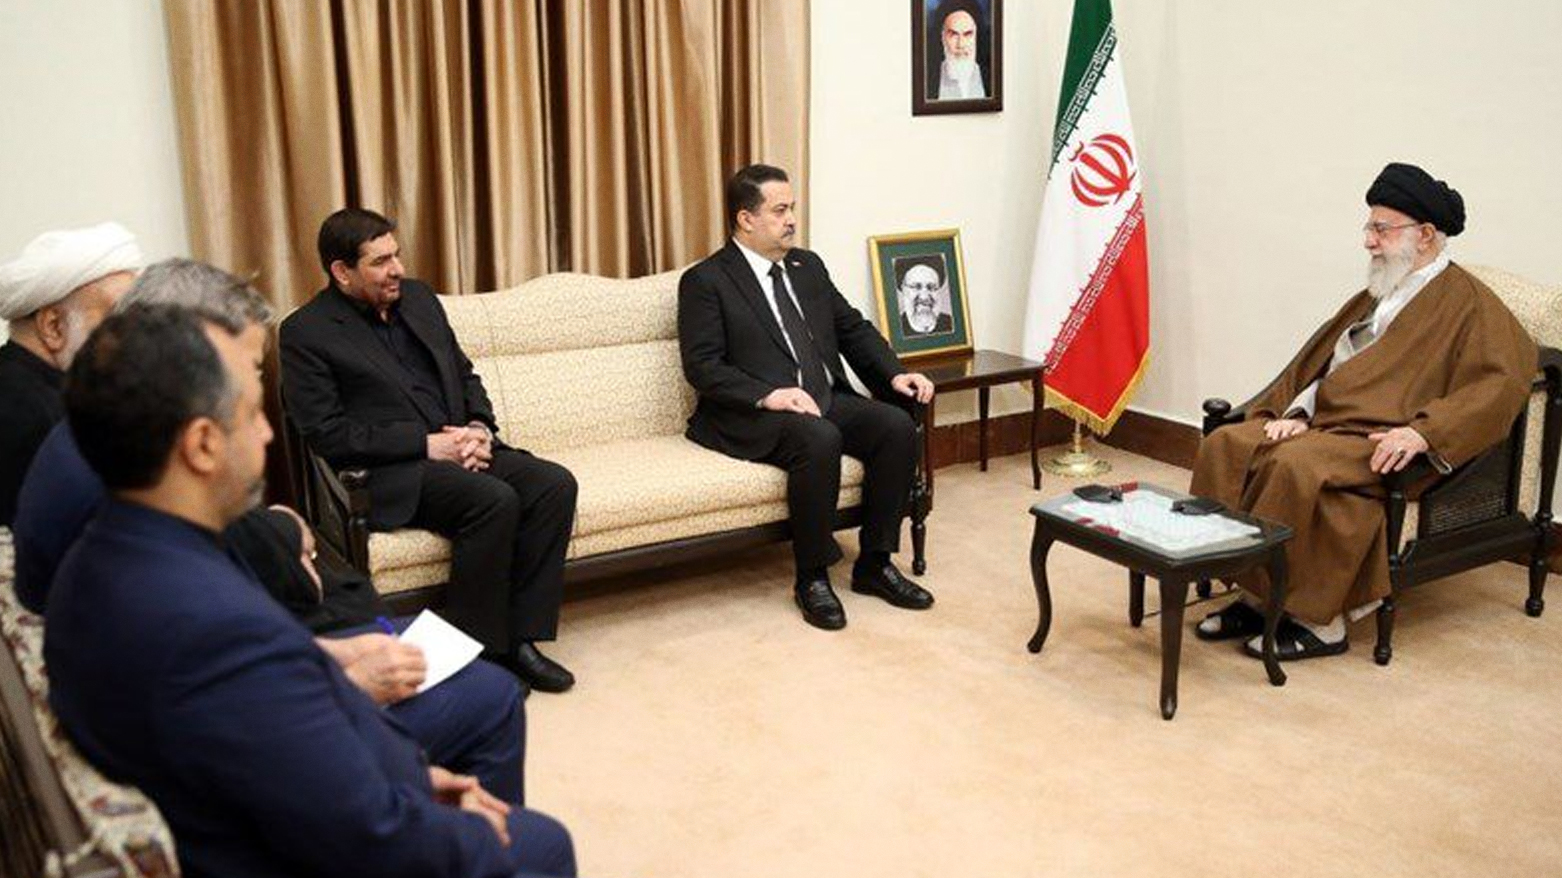 The view of the meeting between Iraq's PM al-Sudani and Iran's Supreme Leader Khamenei in Tehran. (Photo: Iranian News Agency)